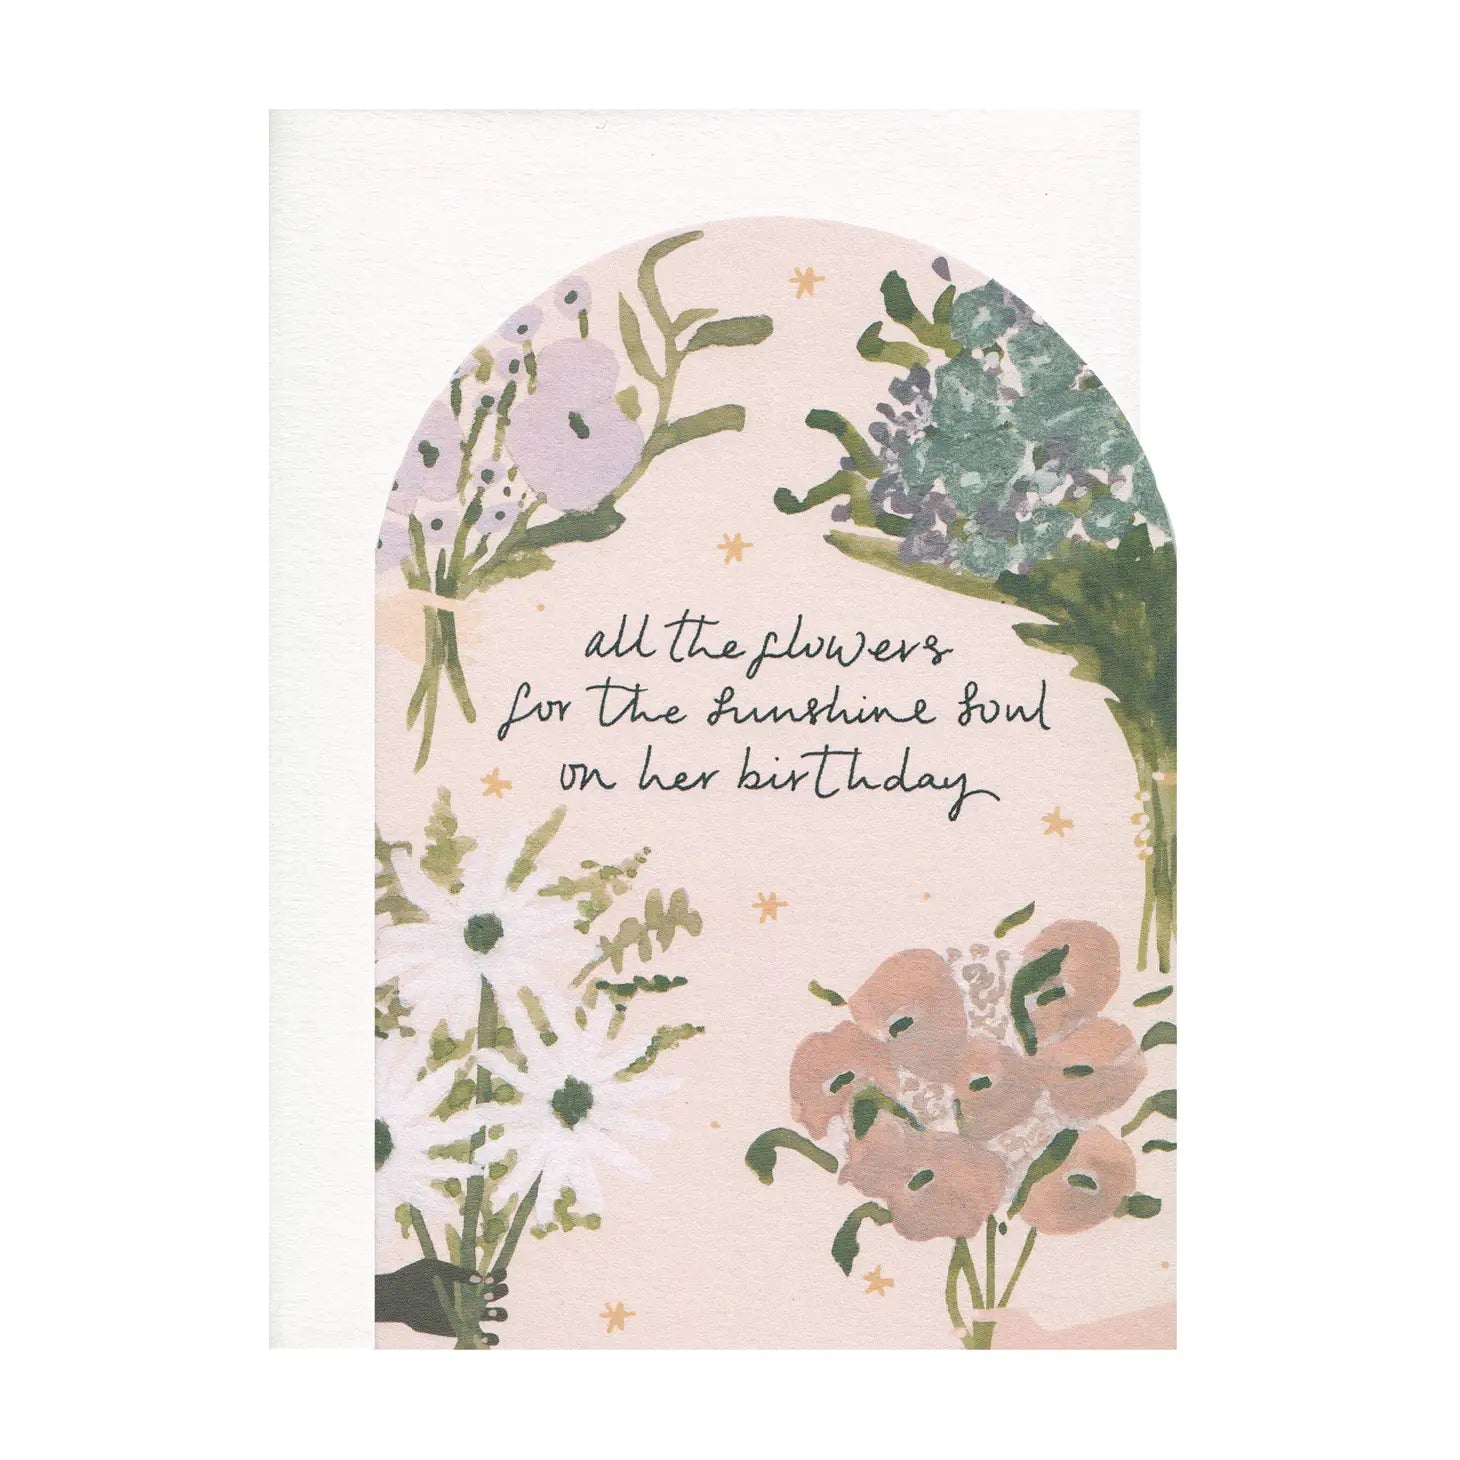 'Flowers For The Sunshine Soul' Birthday Card